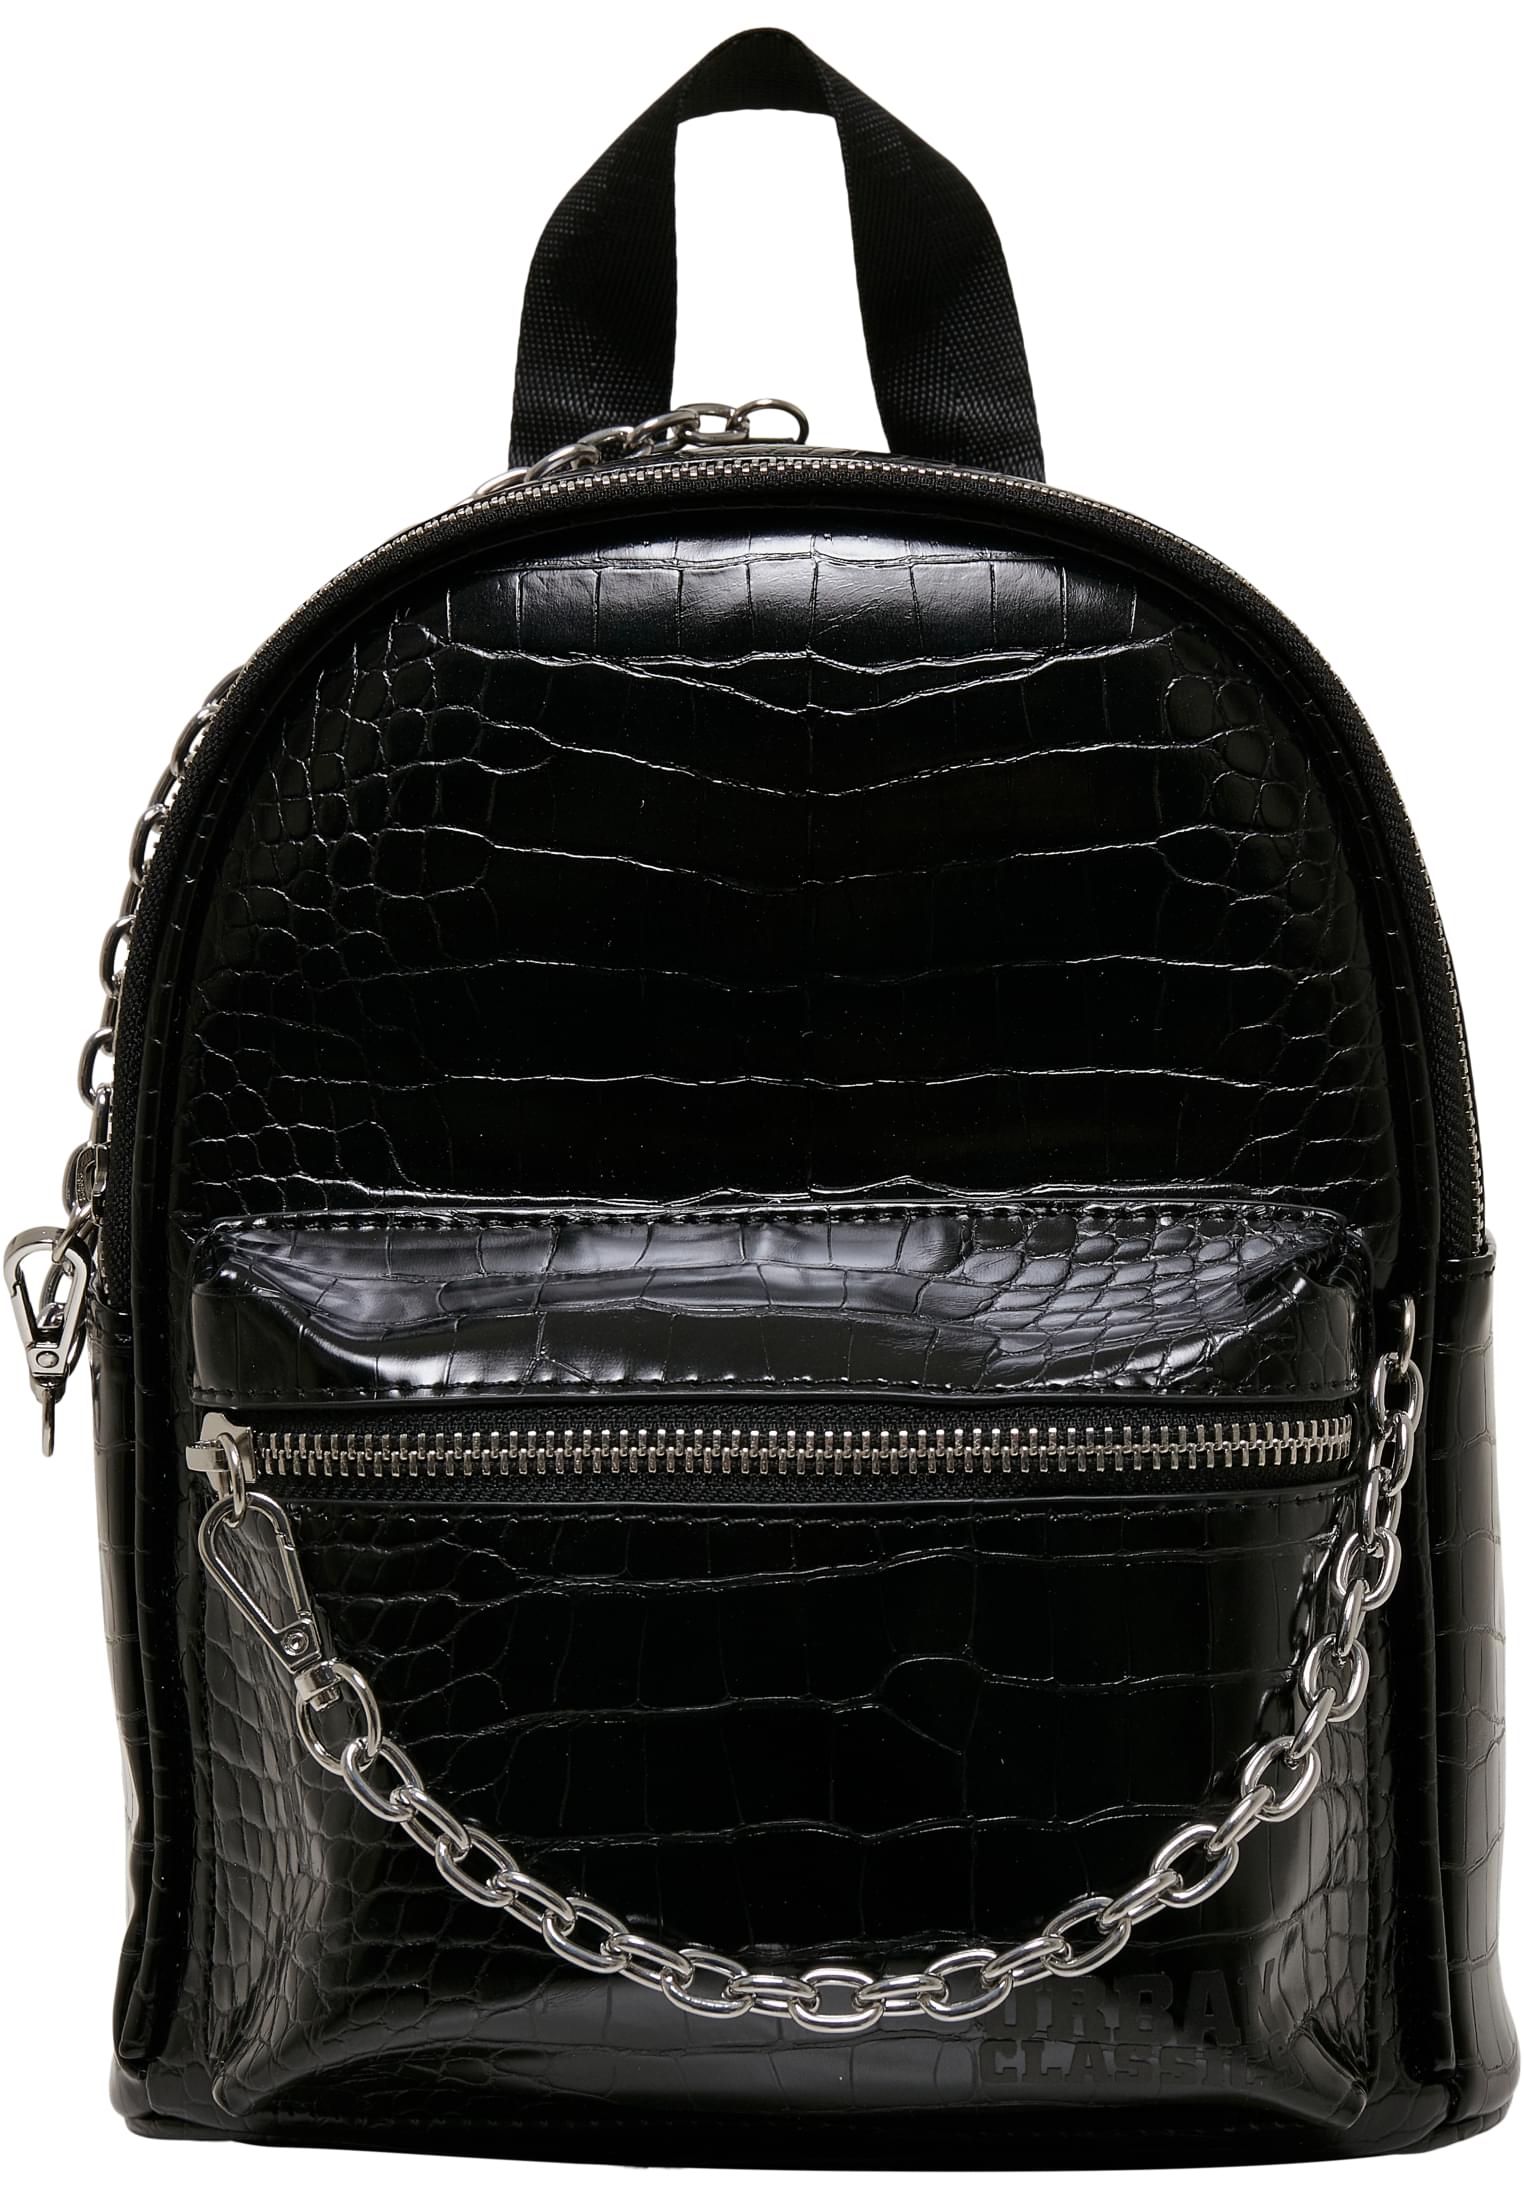 Croco Synthetic Leather Backpack Black